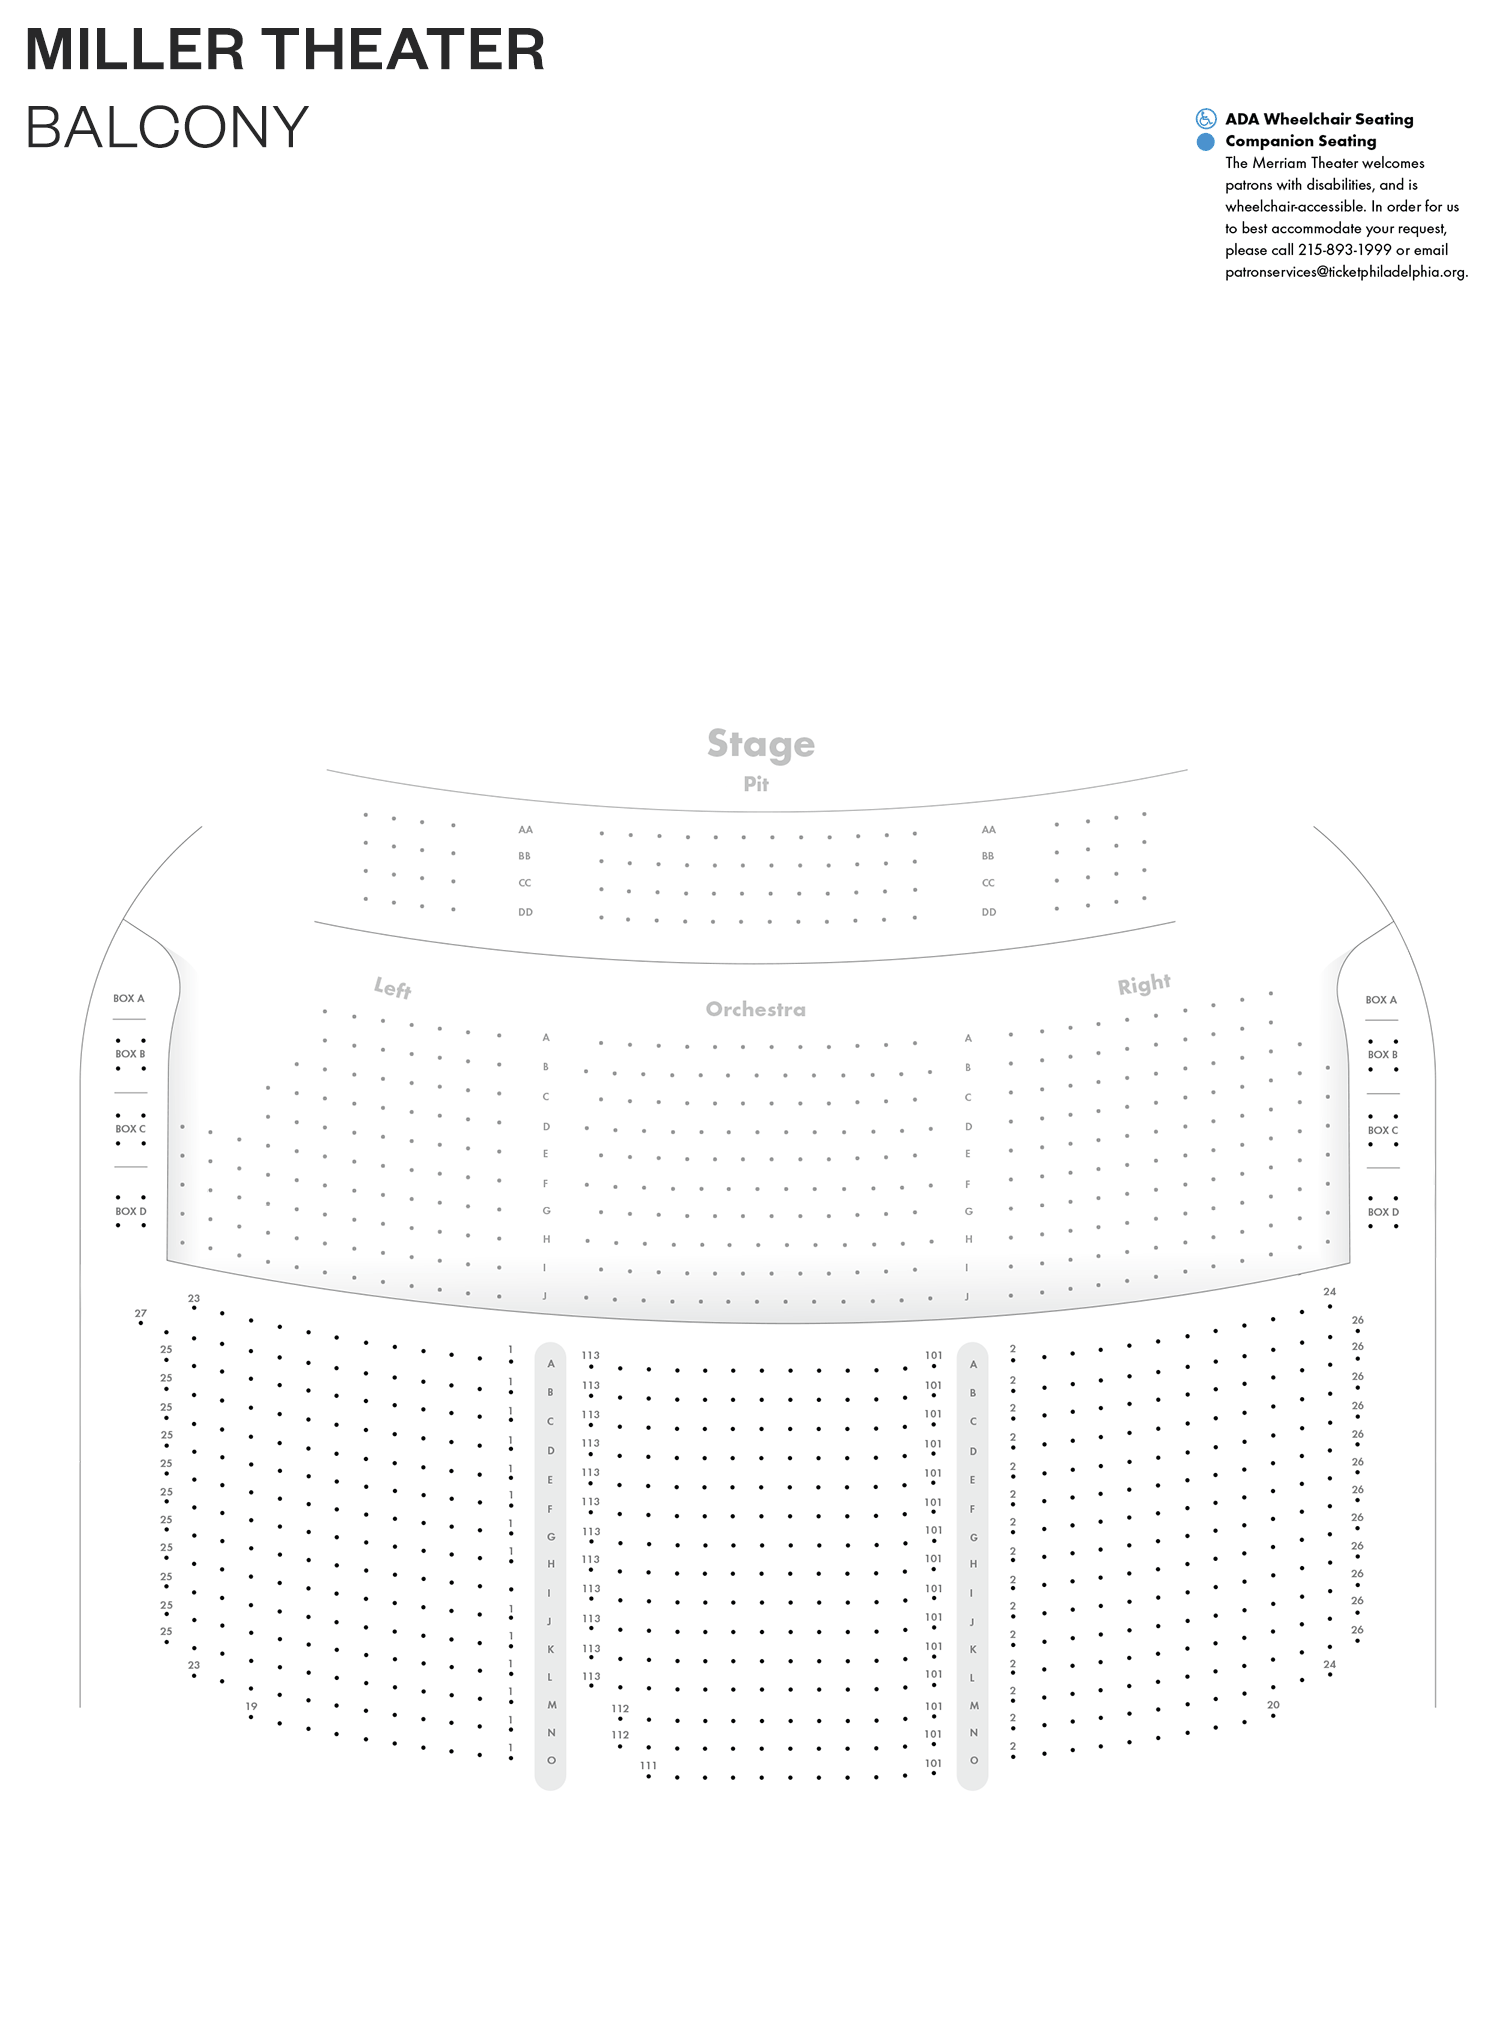 Miller Theater - Balcony - Seating Chart